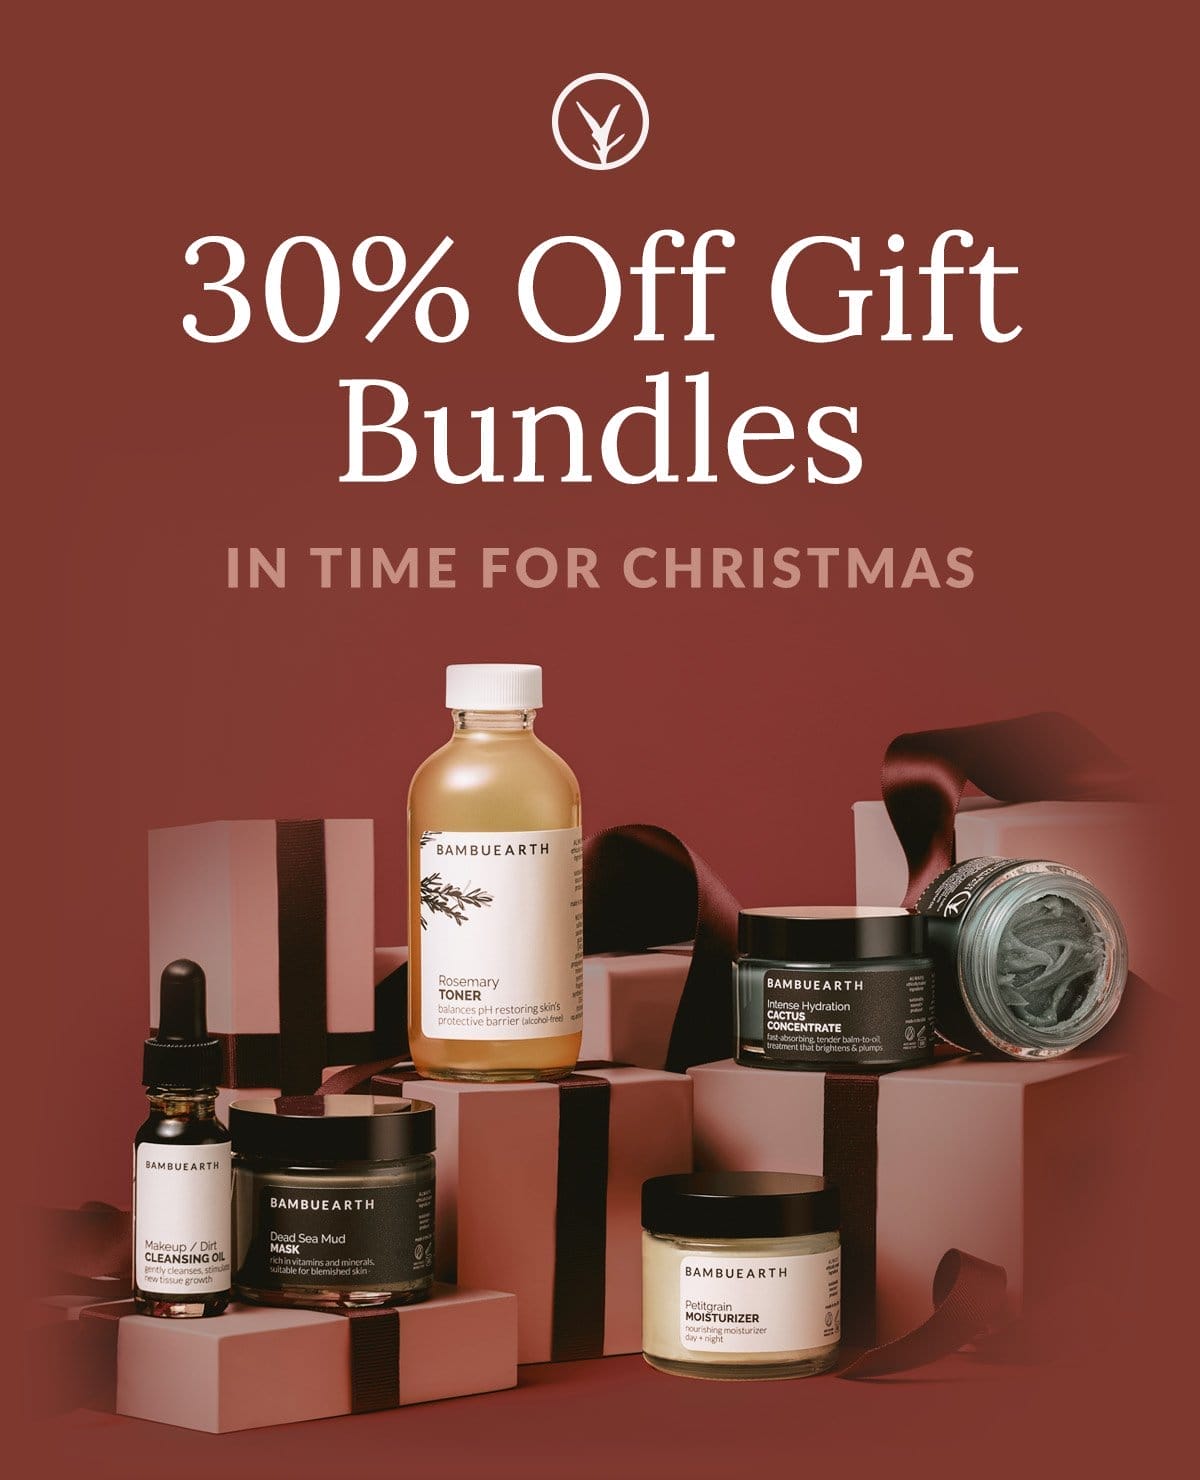 30% Off Gift Bundles In Time for Christmas